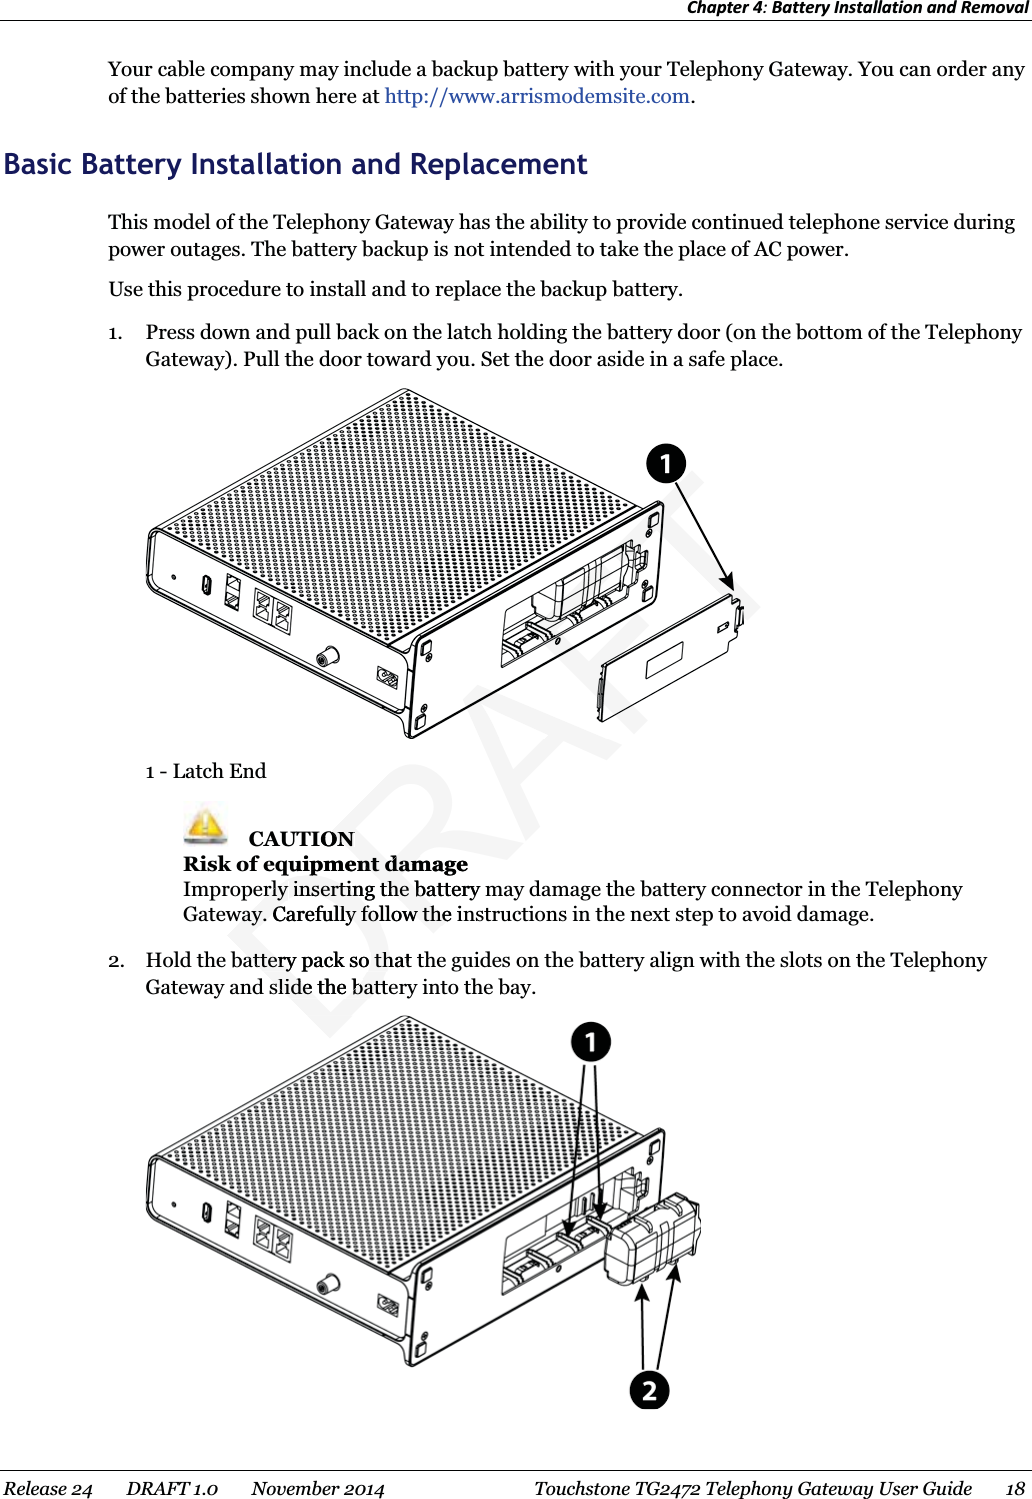 Chapter 4: Battery Installation and Removal  Your cable company may include a backup battery with your Telephony Gateway. You can order any of the batteries shown here at http://www.arrismodemsite.com.   Basic Battery Installation and Replacement This model of the Telephony Gateway has the ability to provide continued telephone service during power outages. The battery backup is not intended to take the place of AC power. Use this procedure to install and to replace the backup battery. 1. Press down and pull back on the latch holding the battery door (on the bottom of the Telephony Gateway). Pull the door toward you. Set the door aside in a safe place.  1 - Latch End  CAUTION Risk of equipment damage Improperly inserting the battery may damage the battery connector in the Telephony Gateway. Carefully follow the instructions in the next step to avoid damage. 2. Hold the battery pack so that the guides on the battery align with the slots on the Telephony Gateway and slide the battery into the bay.  Release 24    DRAFT 1.0    November 2014  Touchstone TG2472 Telephony Gateway User Guide    18  DRAFTIONONquipment damageuipment damerly erly inserting the battery minserting the baway. Carefully follow the iway. Carefully follow theattery pack so that attery pack so thslide the batteslide the batt